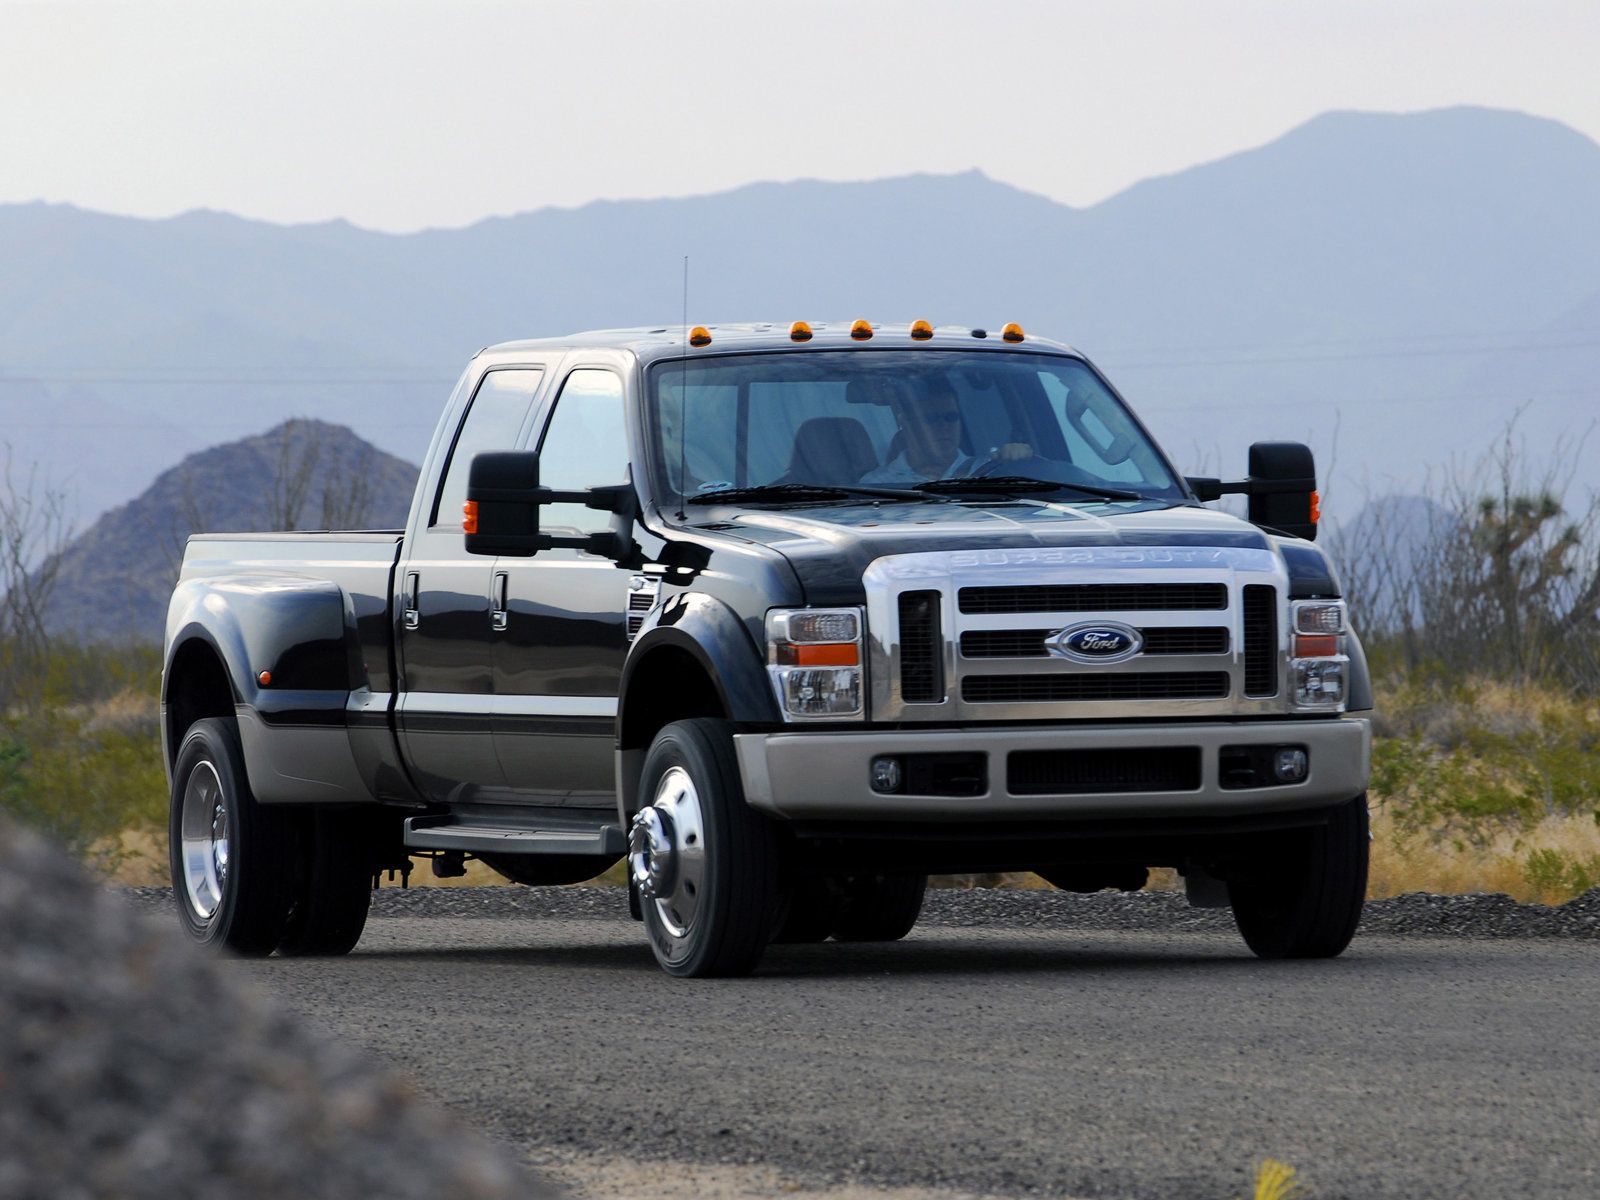 Ford F450 picture. Ford photo gallery